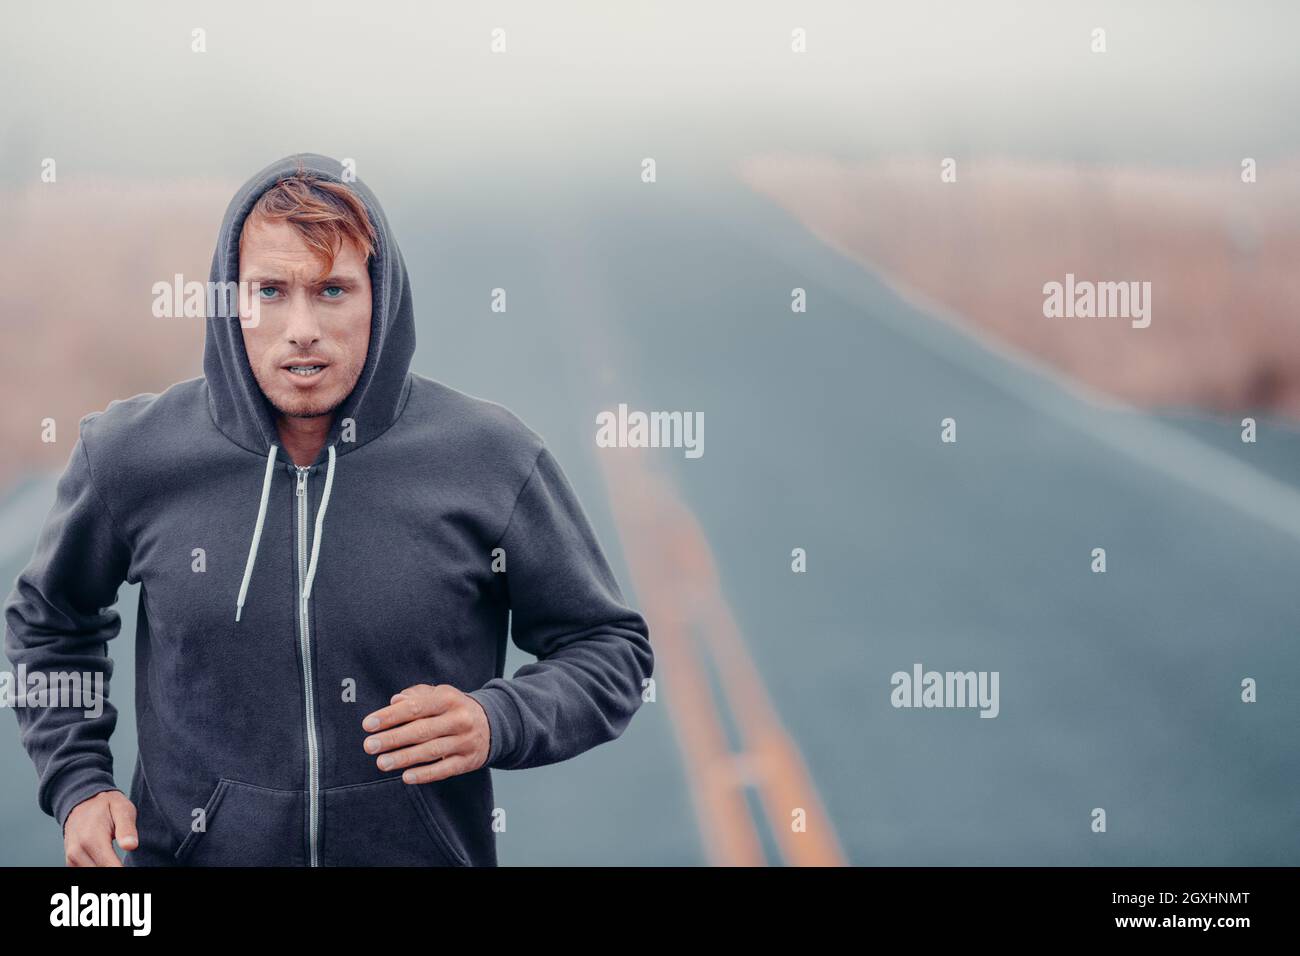 Morning run endurance runner athlete running outside in cold winter training cardio. Man breathing while jogging outdoors in hoody Stock Photo